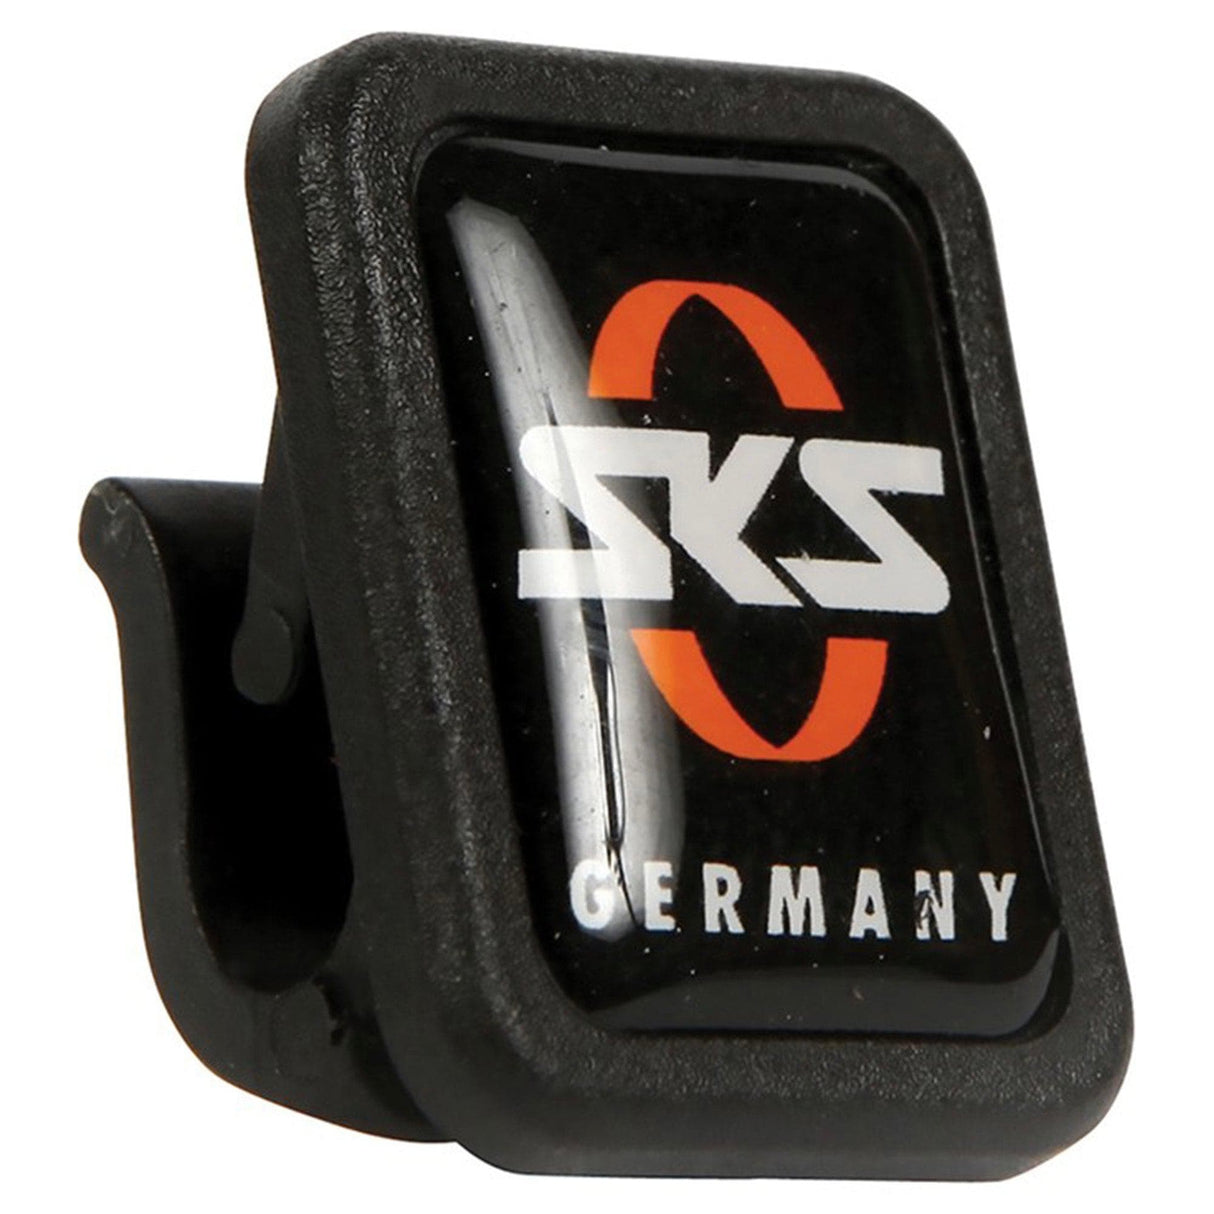 Sks U-Stay Mounting System Clip For Velo Series With Sks Lens: